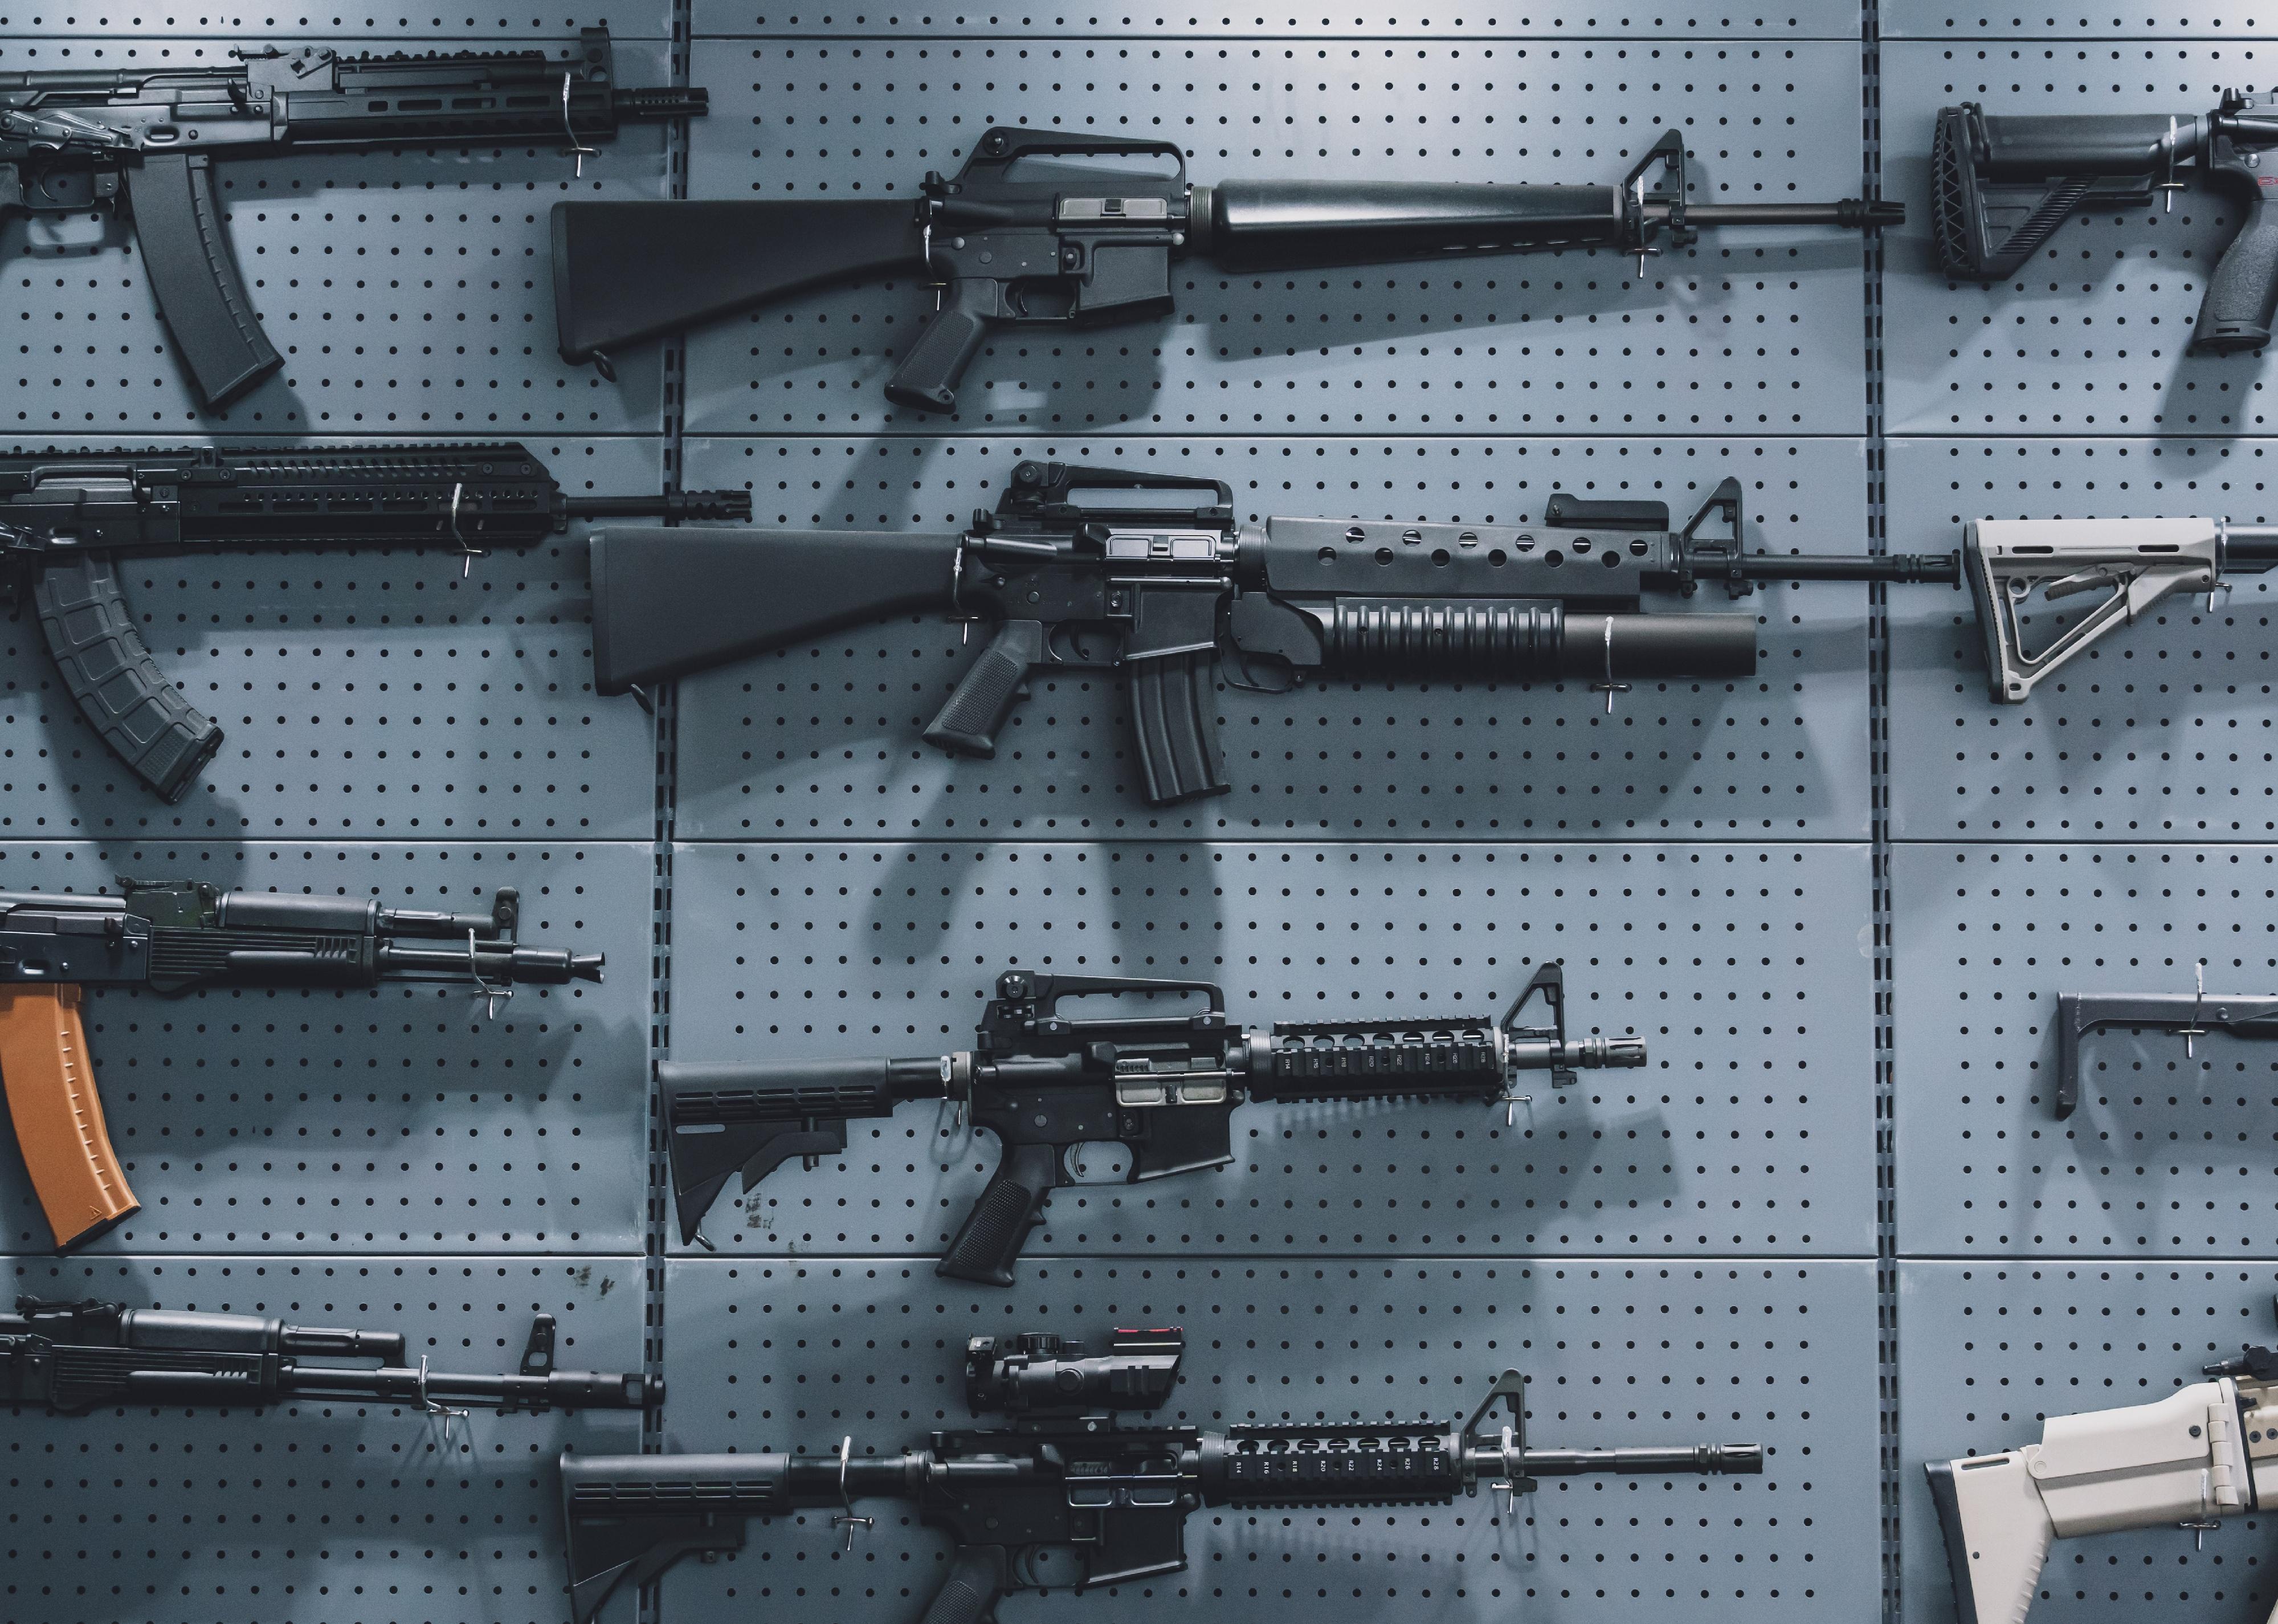 Collection of rifles and carbines on a wall.